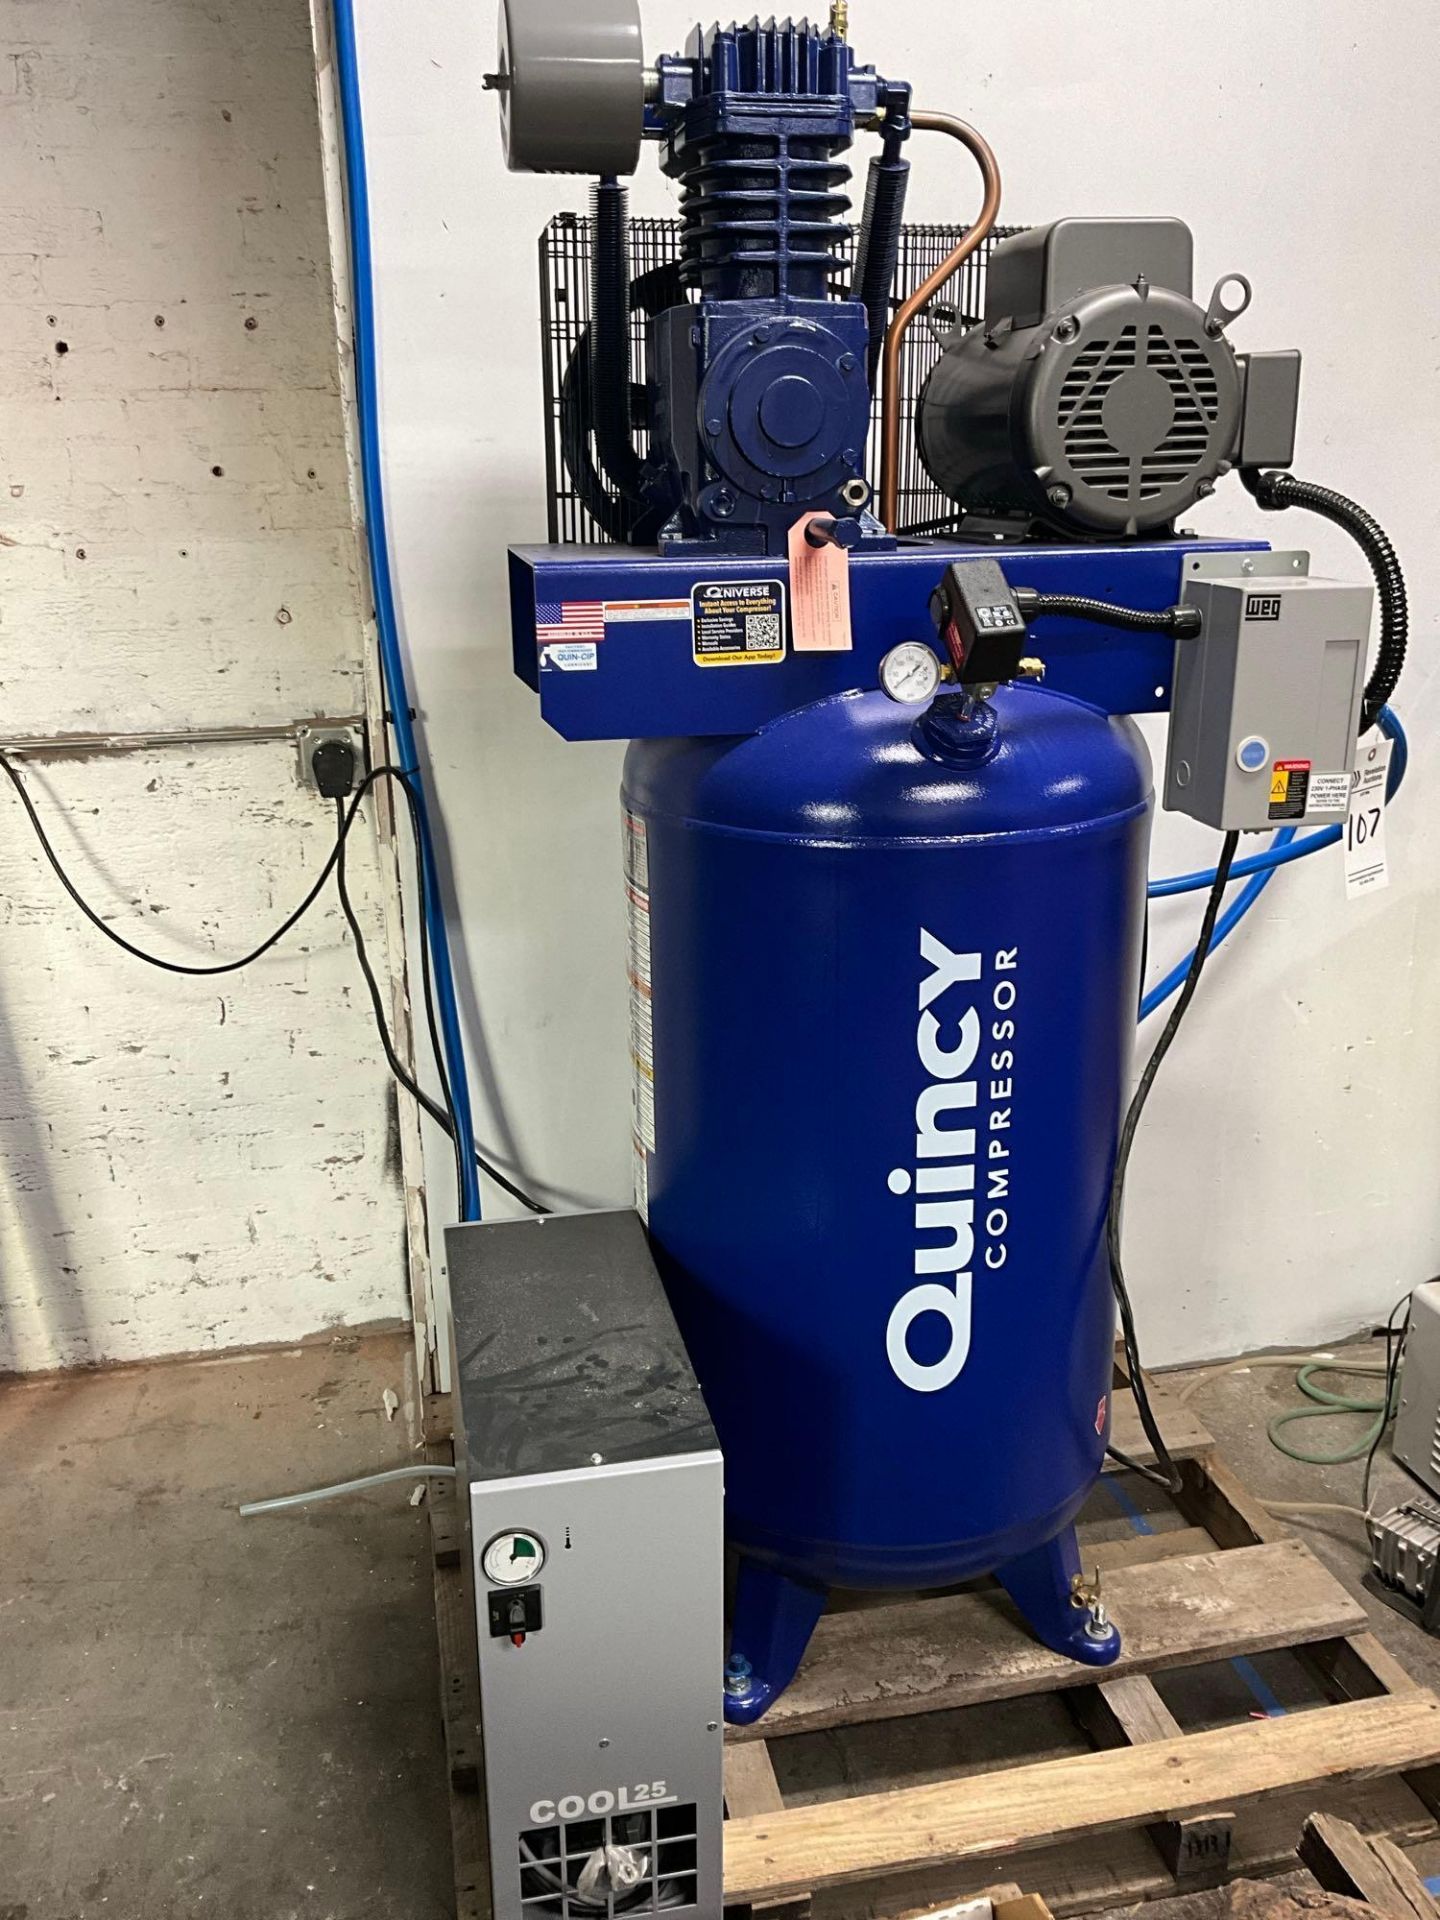 QUINCY 7 1/2 HP 80 GALLON COMPRESSOR WITH COOL 25 REFRIGERATED AIR DRYER - Image 2 of 13